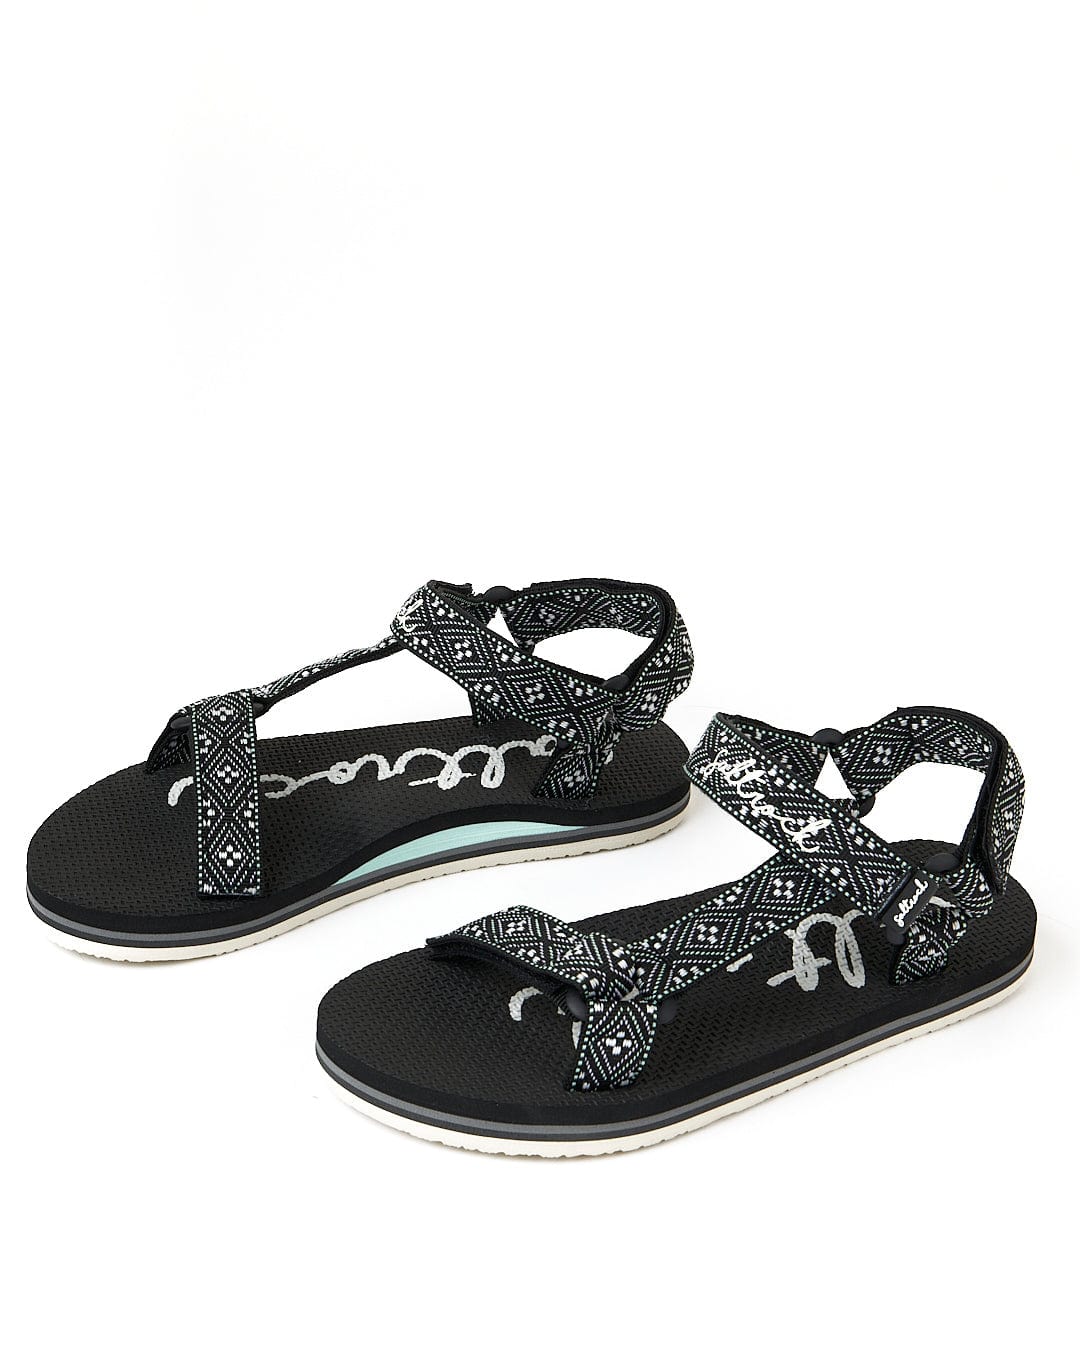 A pair of black and white Saltrock Path Finder - Webbing Sandals on a white background.